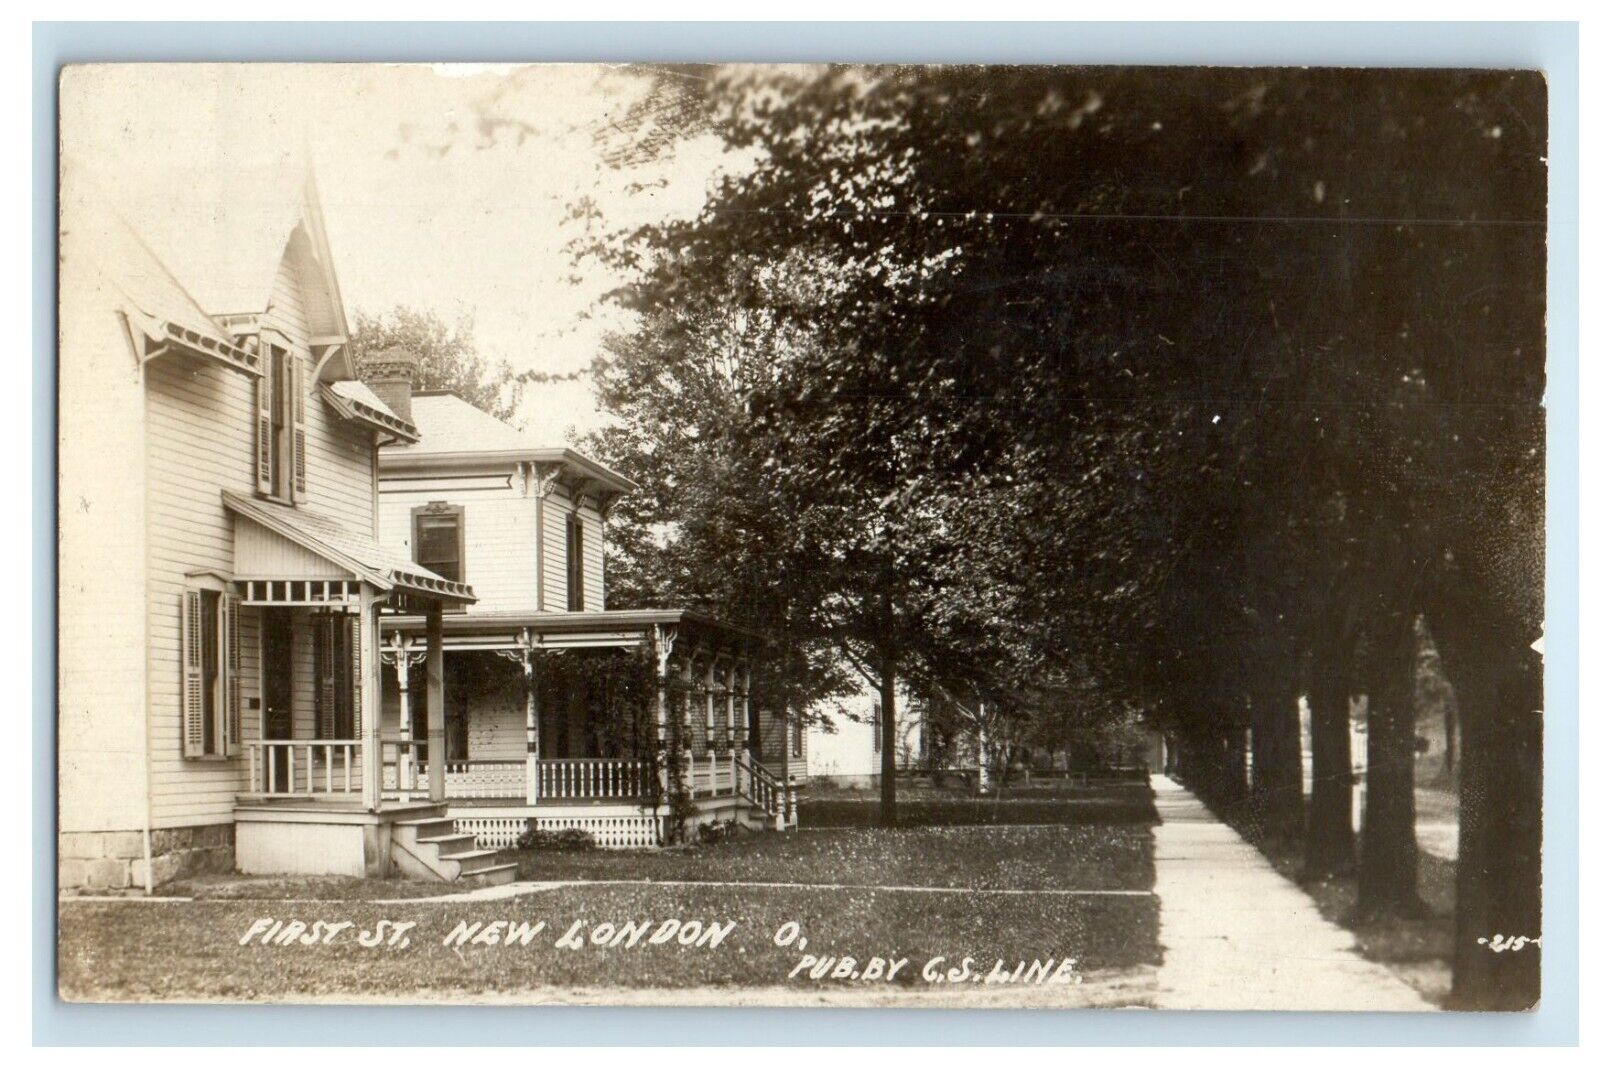 1909 First St. New London Ohio OH, House Tree Lined RPPC Photo Antique Postcard